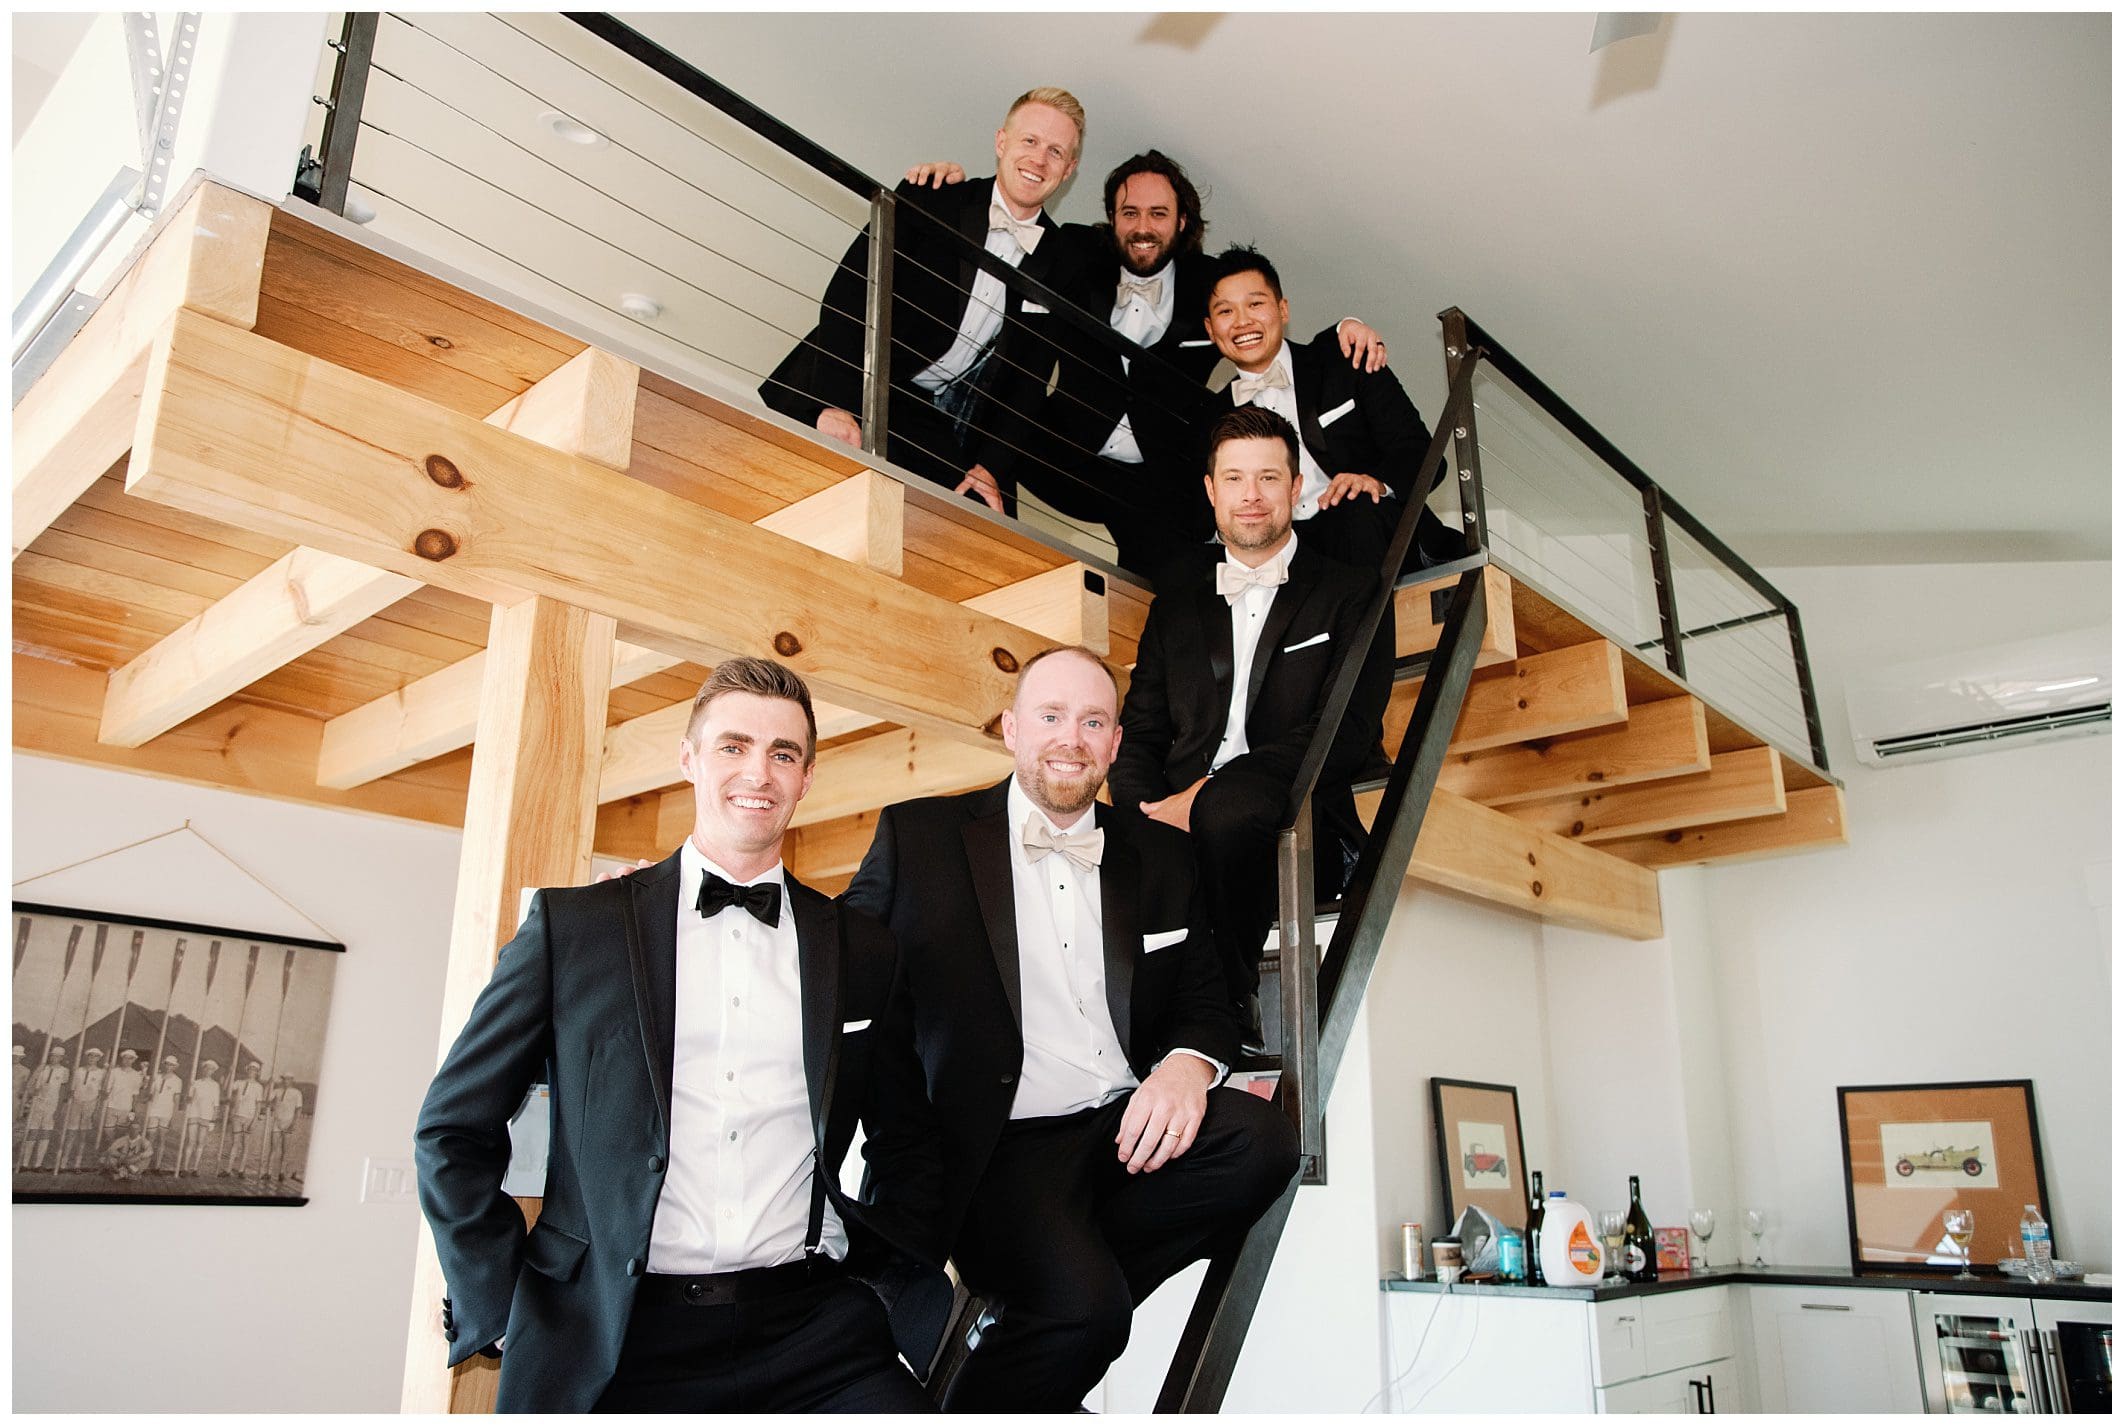 A group of men in tuxedos posing on a staircase at a fall wedding.